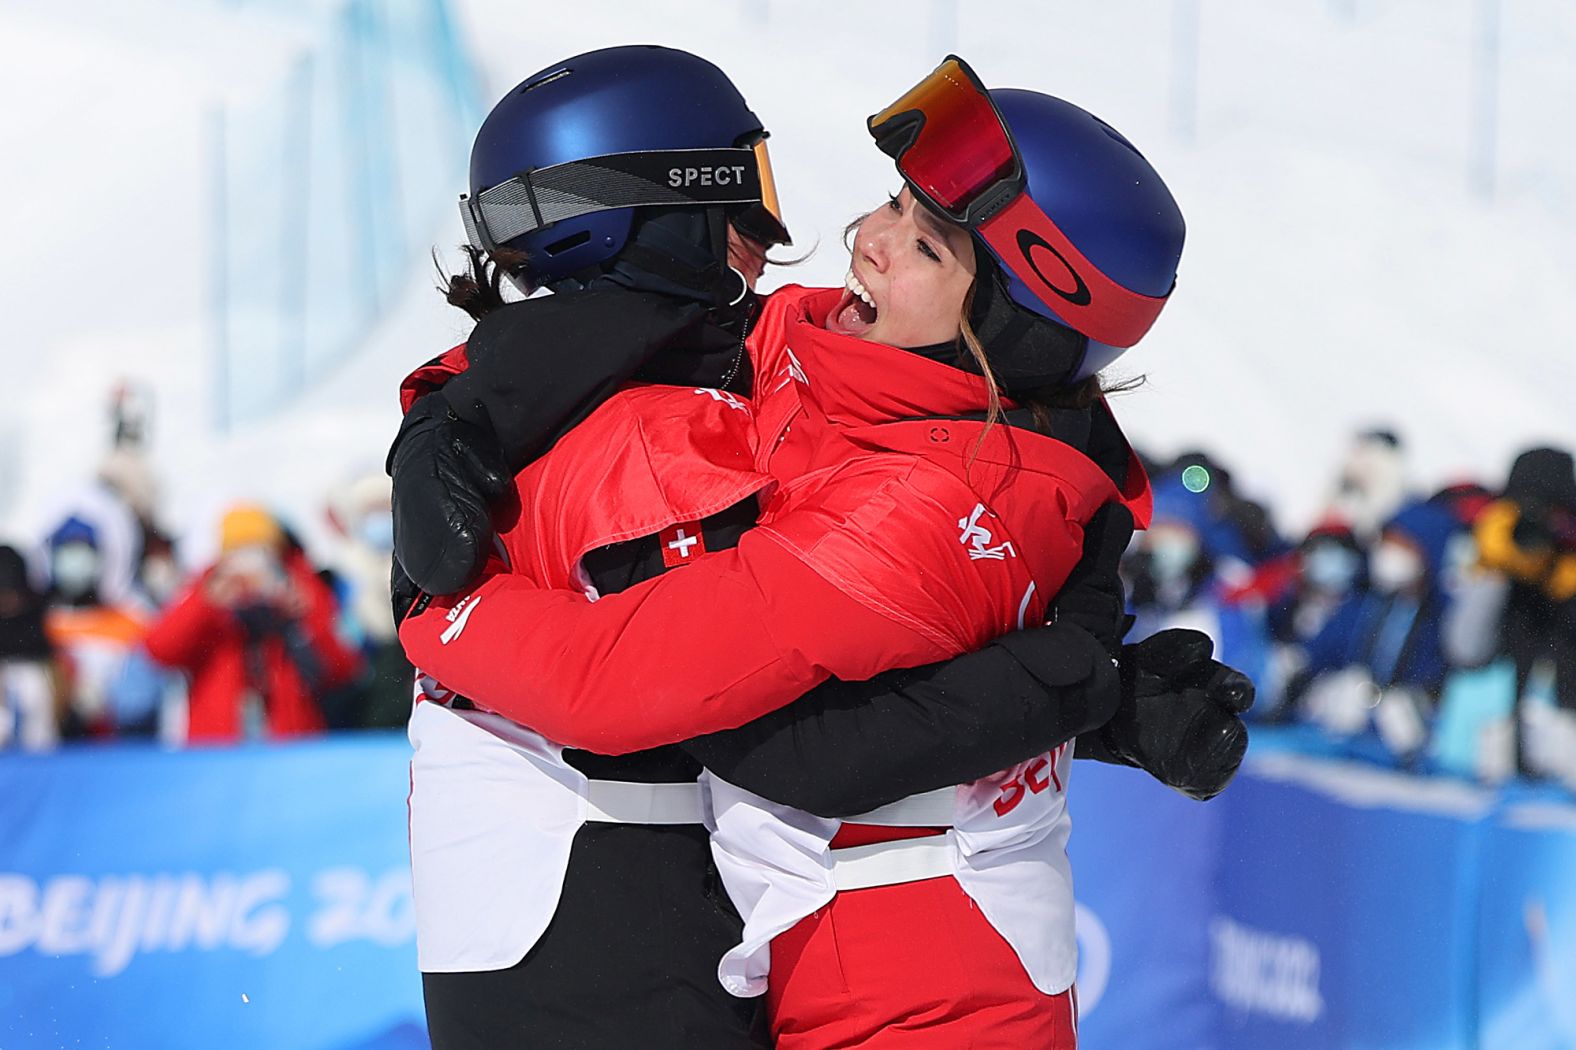 Swiss freestyle skier Mathilde Gremaud, left, hugs China's Eileen Gu after <a href="index.php?page=&url=https%3A%2F%2Fwww.cnn.com%2Fworld%2Flive-news%2Fbeijing-winter-olympics-02-15-22-spt%2Fh_37c061d273dbb25165e83ba6fb203dd2" target="_blank">they finished 1-2 in the slopestyle finals</a> on February 15. Gremaud won gold and Gu won silver.